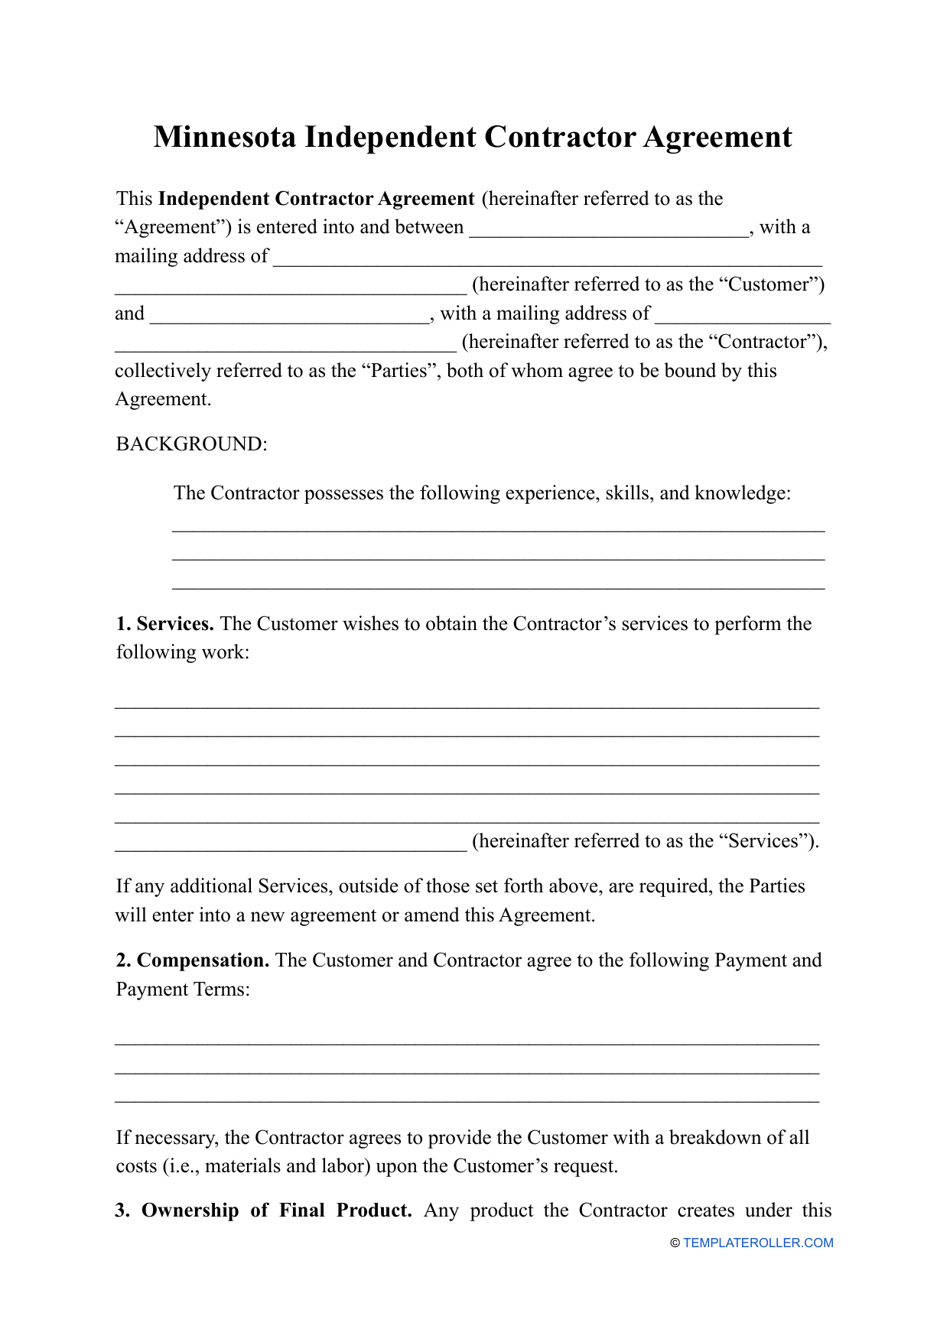 Independent Contractor Agreement Template - Minnesota, Page 1